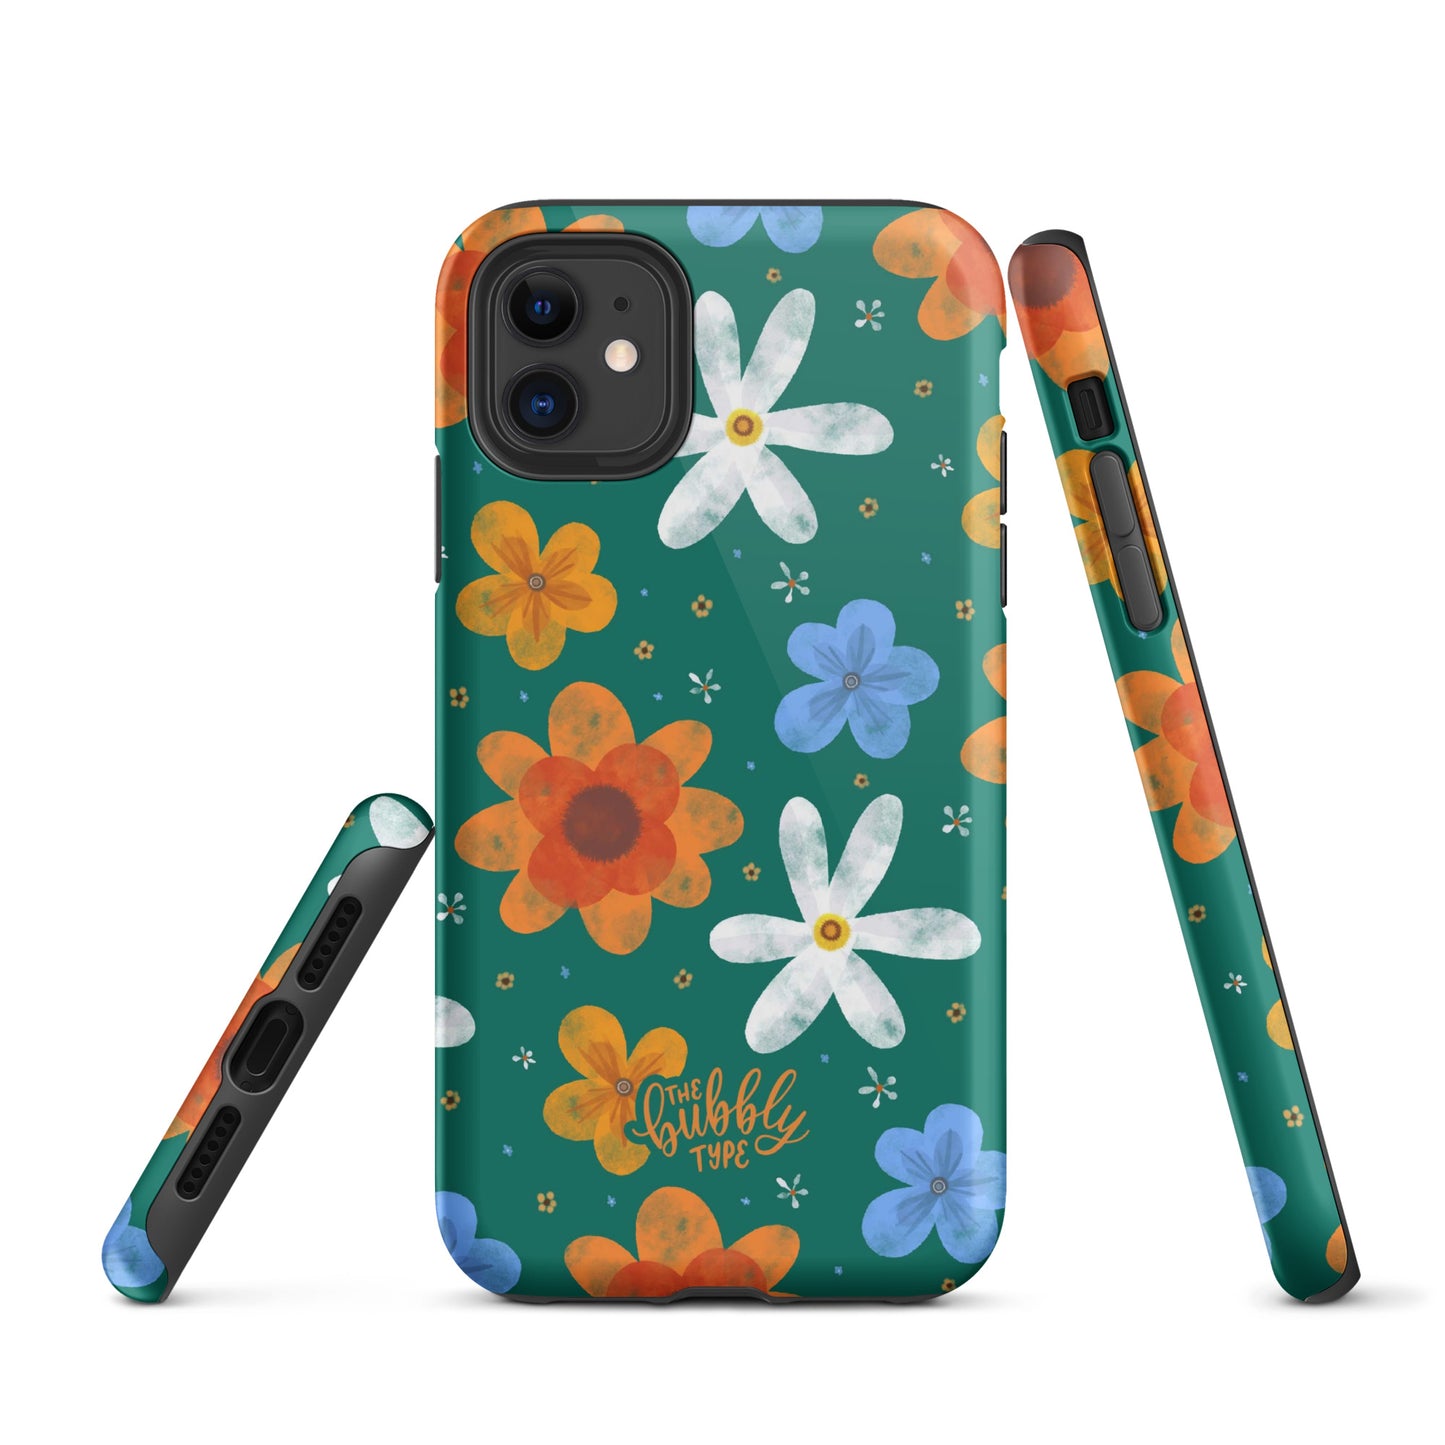 Groovy Flowers (Green) Tough iPhone case